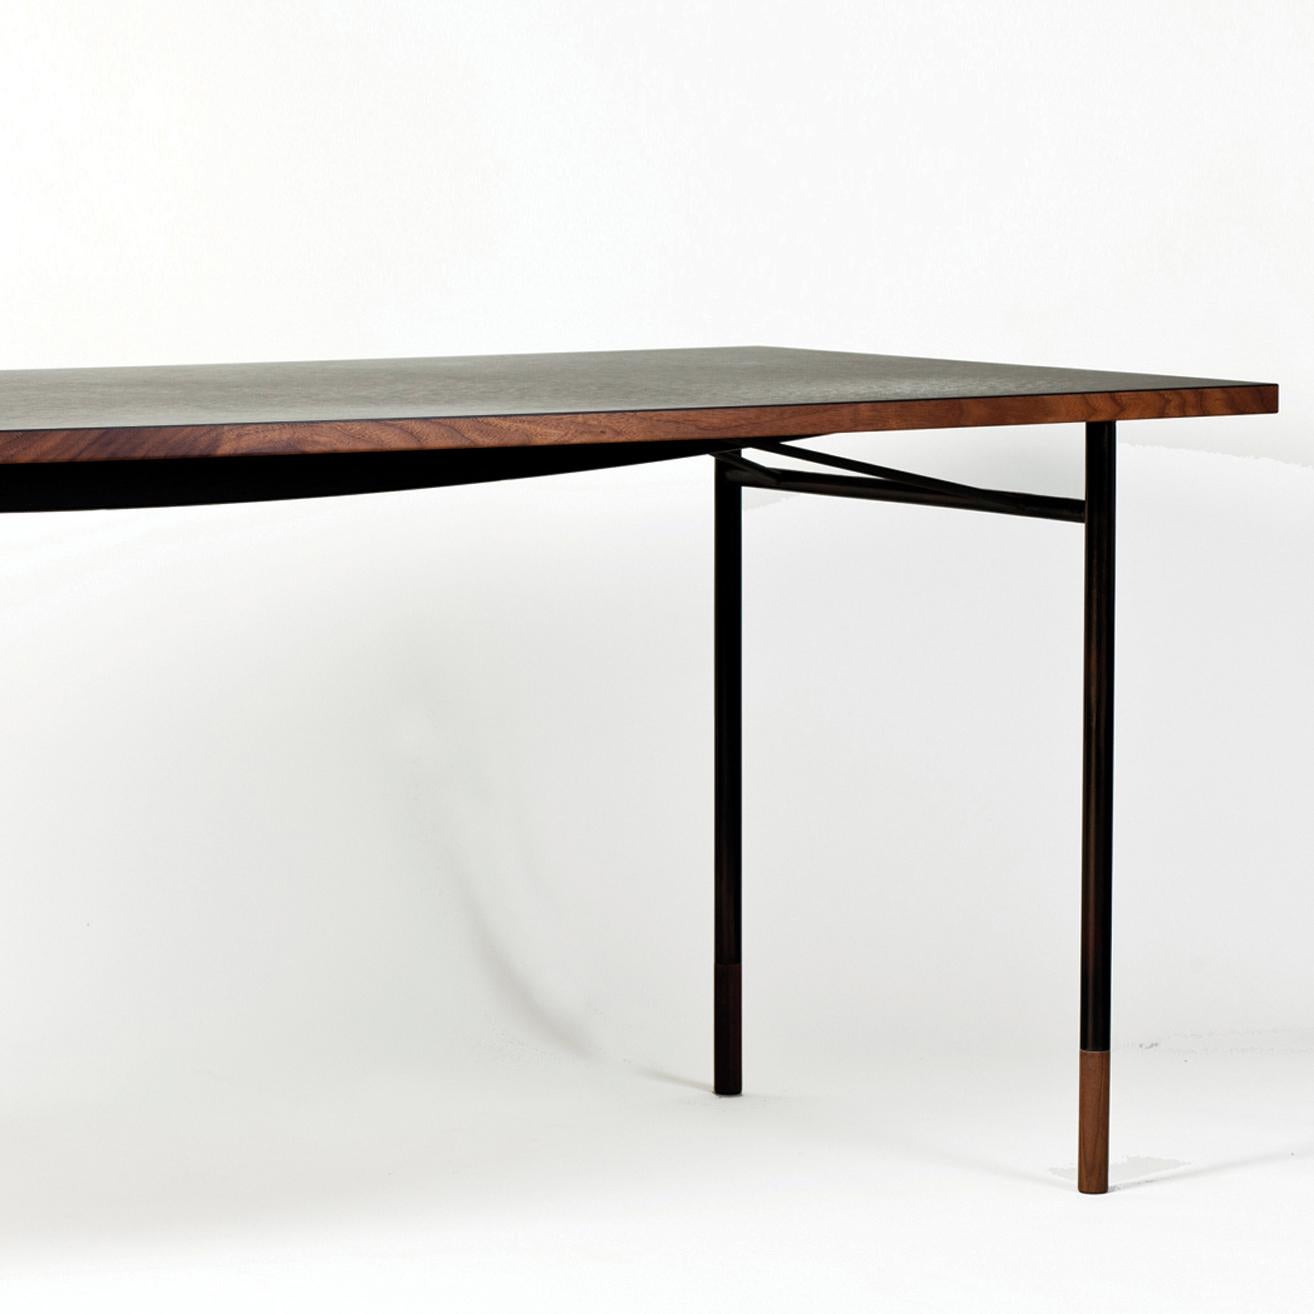 Desk designed by Finn Jhul
Manufactured by One collection Finn Juhl, (Denmark)

When Finn Juhl established his first studio at the exclusive address of 33 Nyhavn in central Copenhagen in 1945, he designed a very simple desk with burnished steel